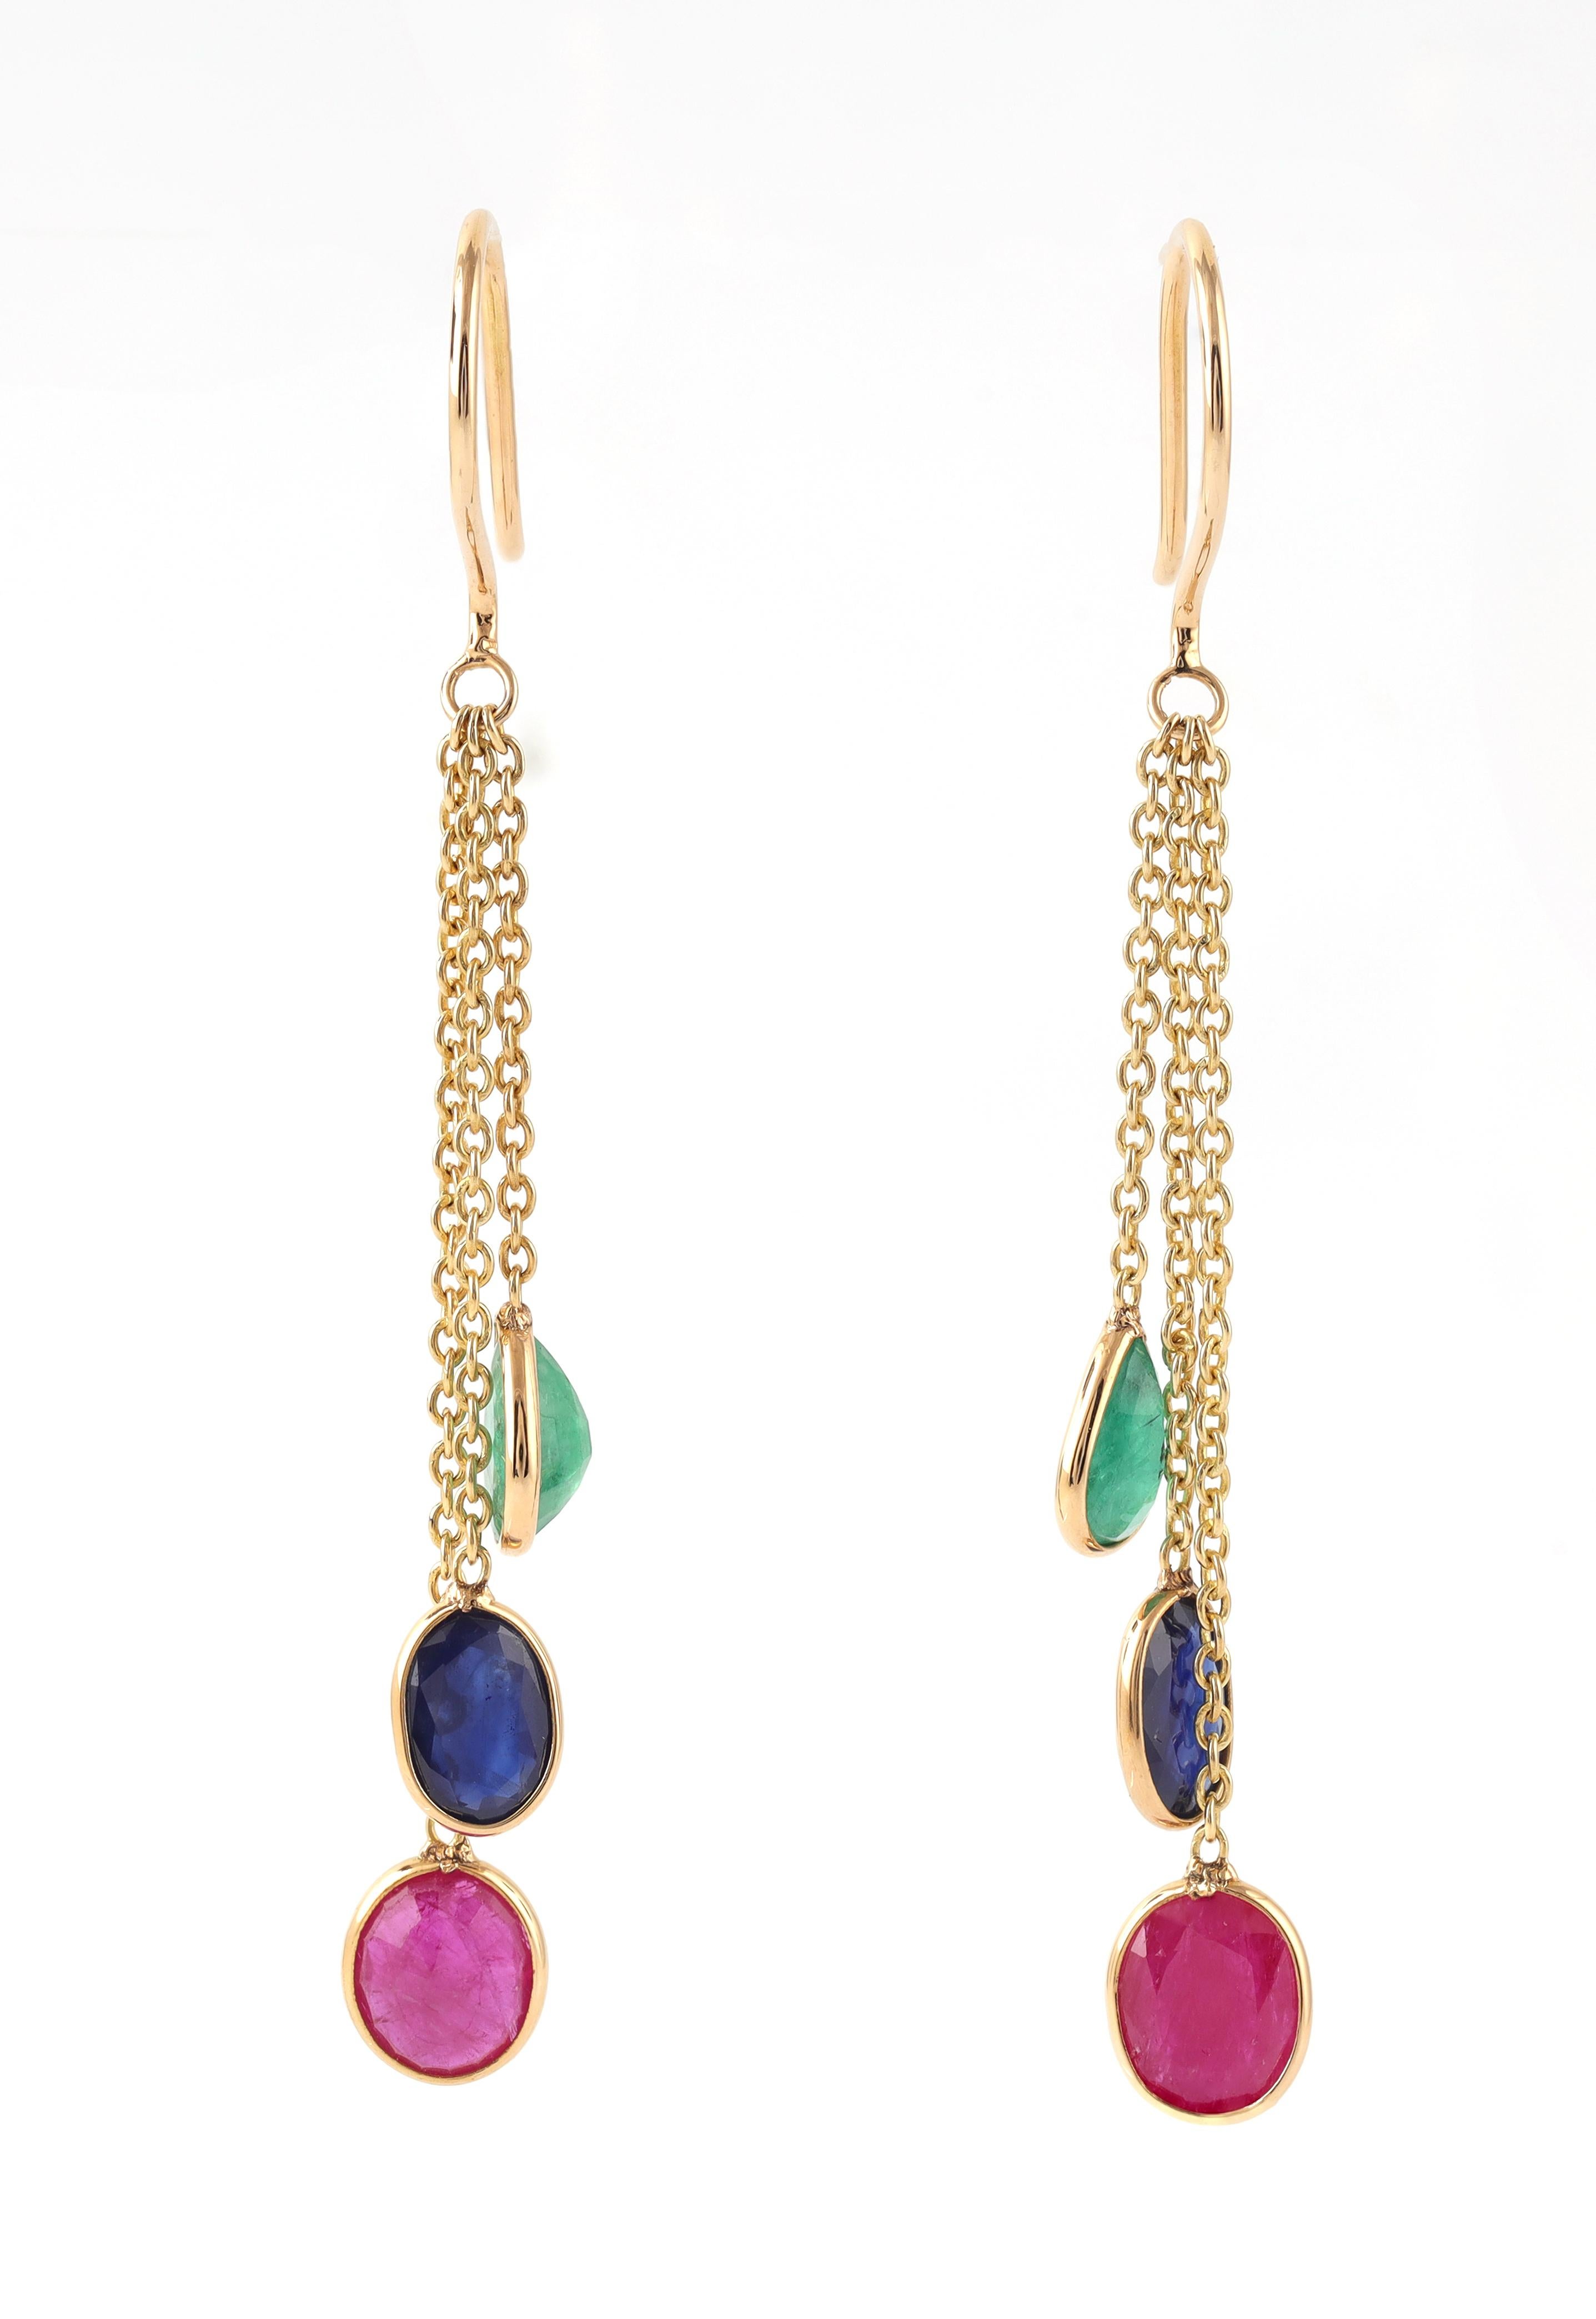 Cast in 18 karat gold, these earrings are hand set with 2.85 Carat Emerald Ruby & Sapphire . Available in 18k Gold.
Composition
Emerald Ruby Sapphire : 2.85 Carat
Gold : 1.21 gms


